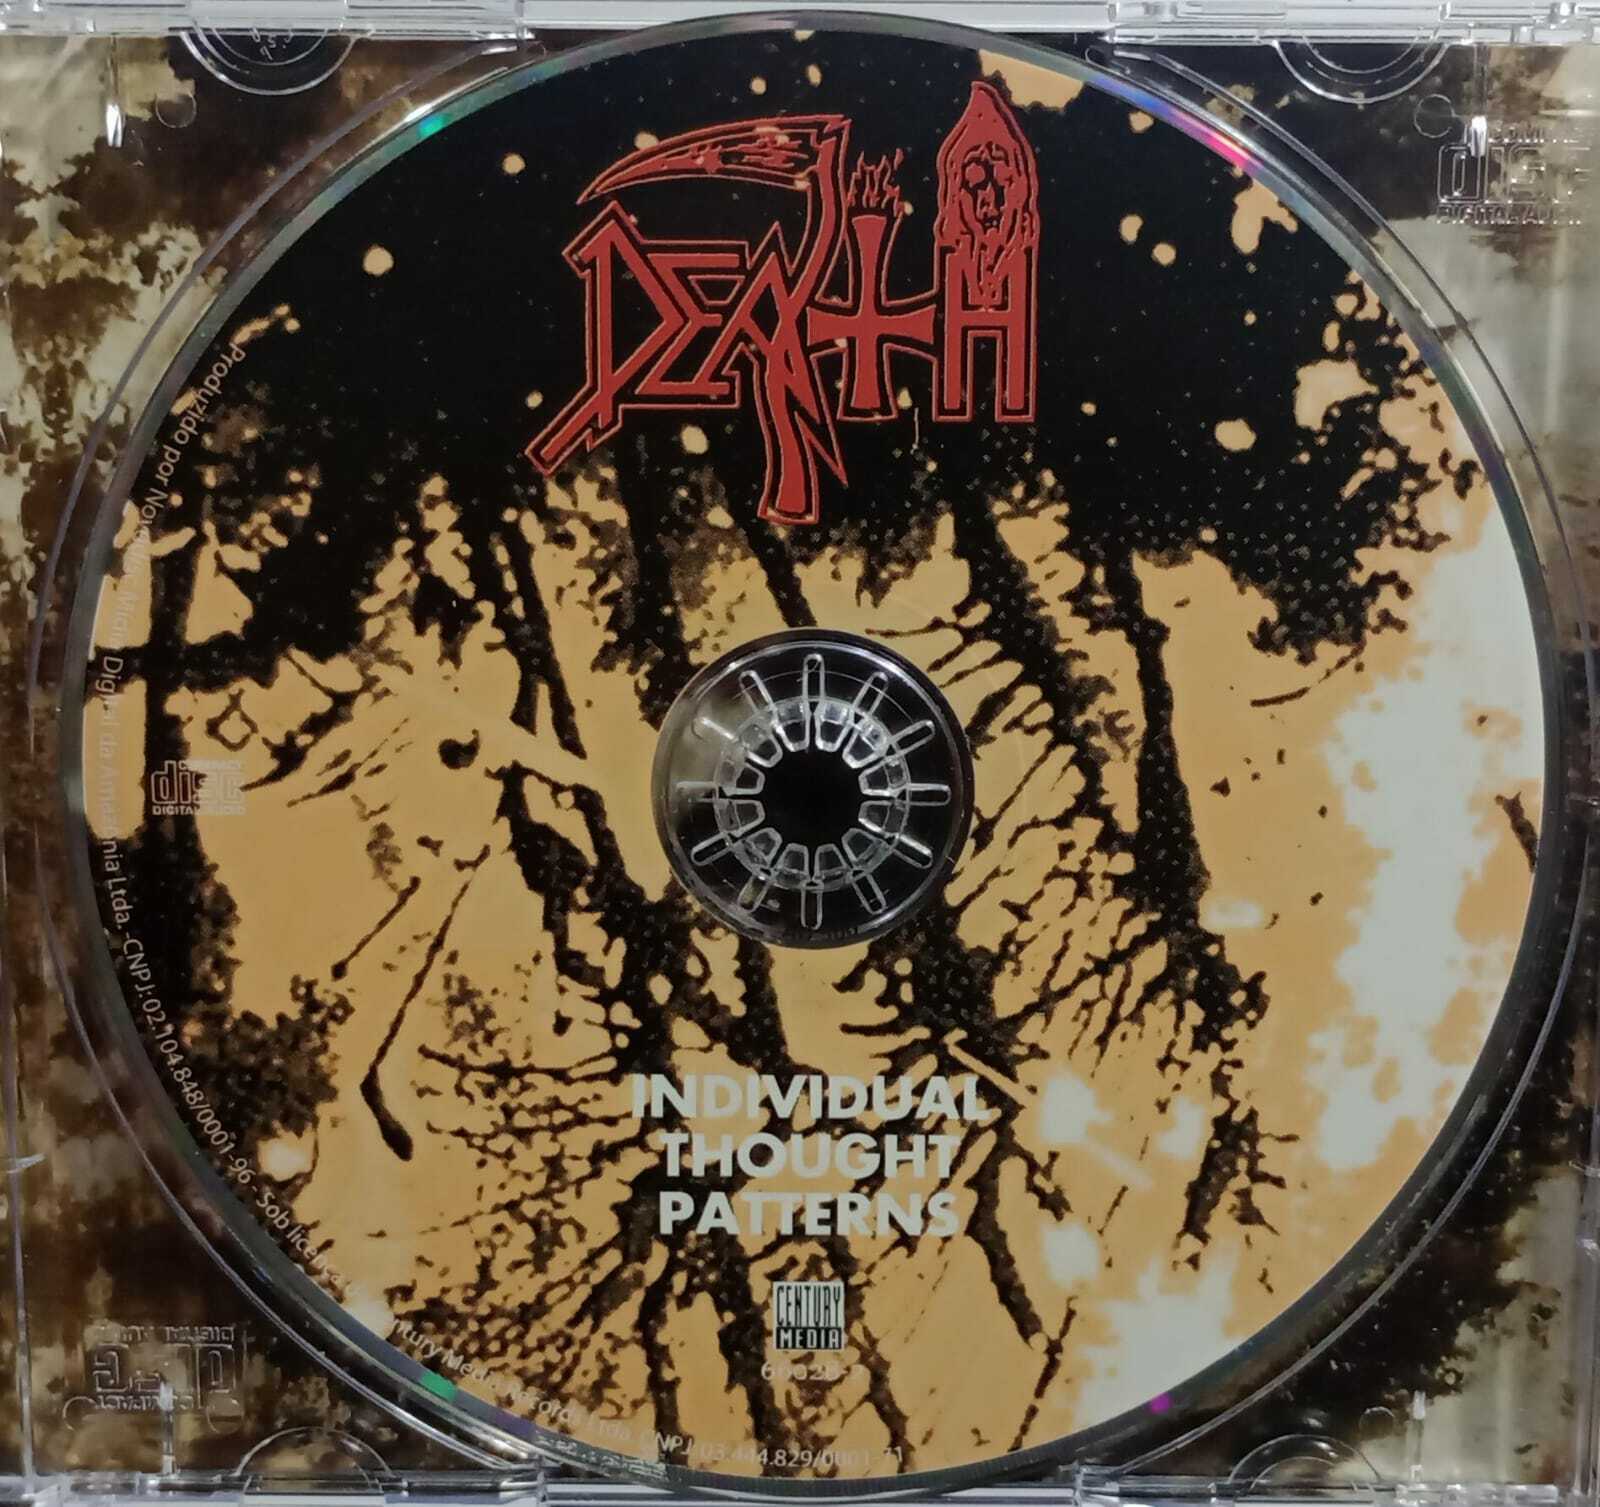 CD - Death - Individual Thought Patterns